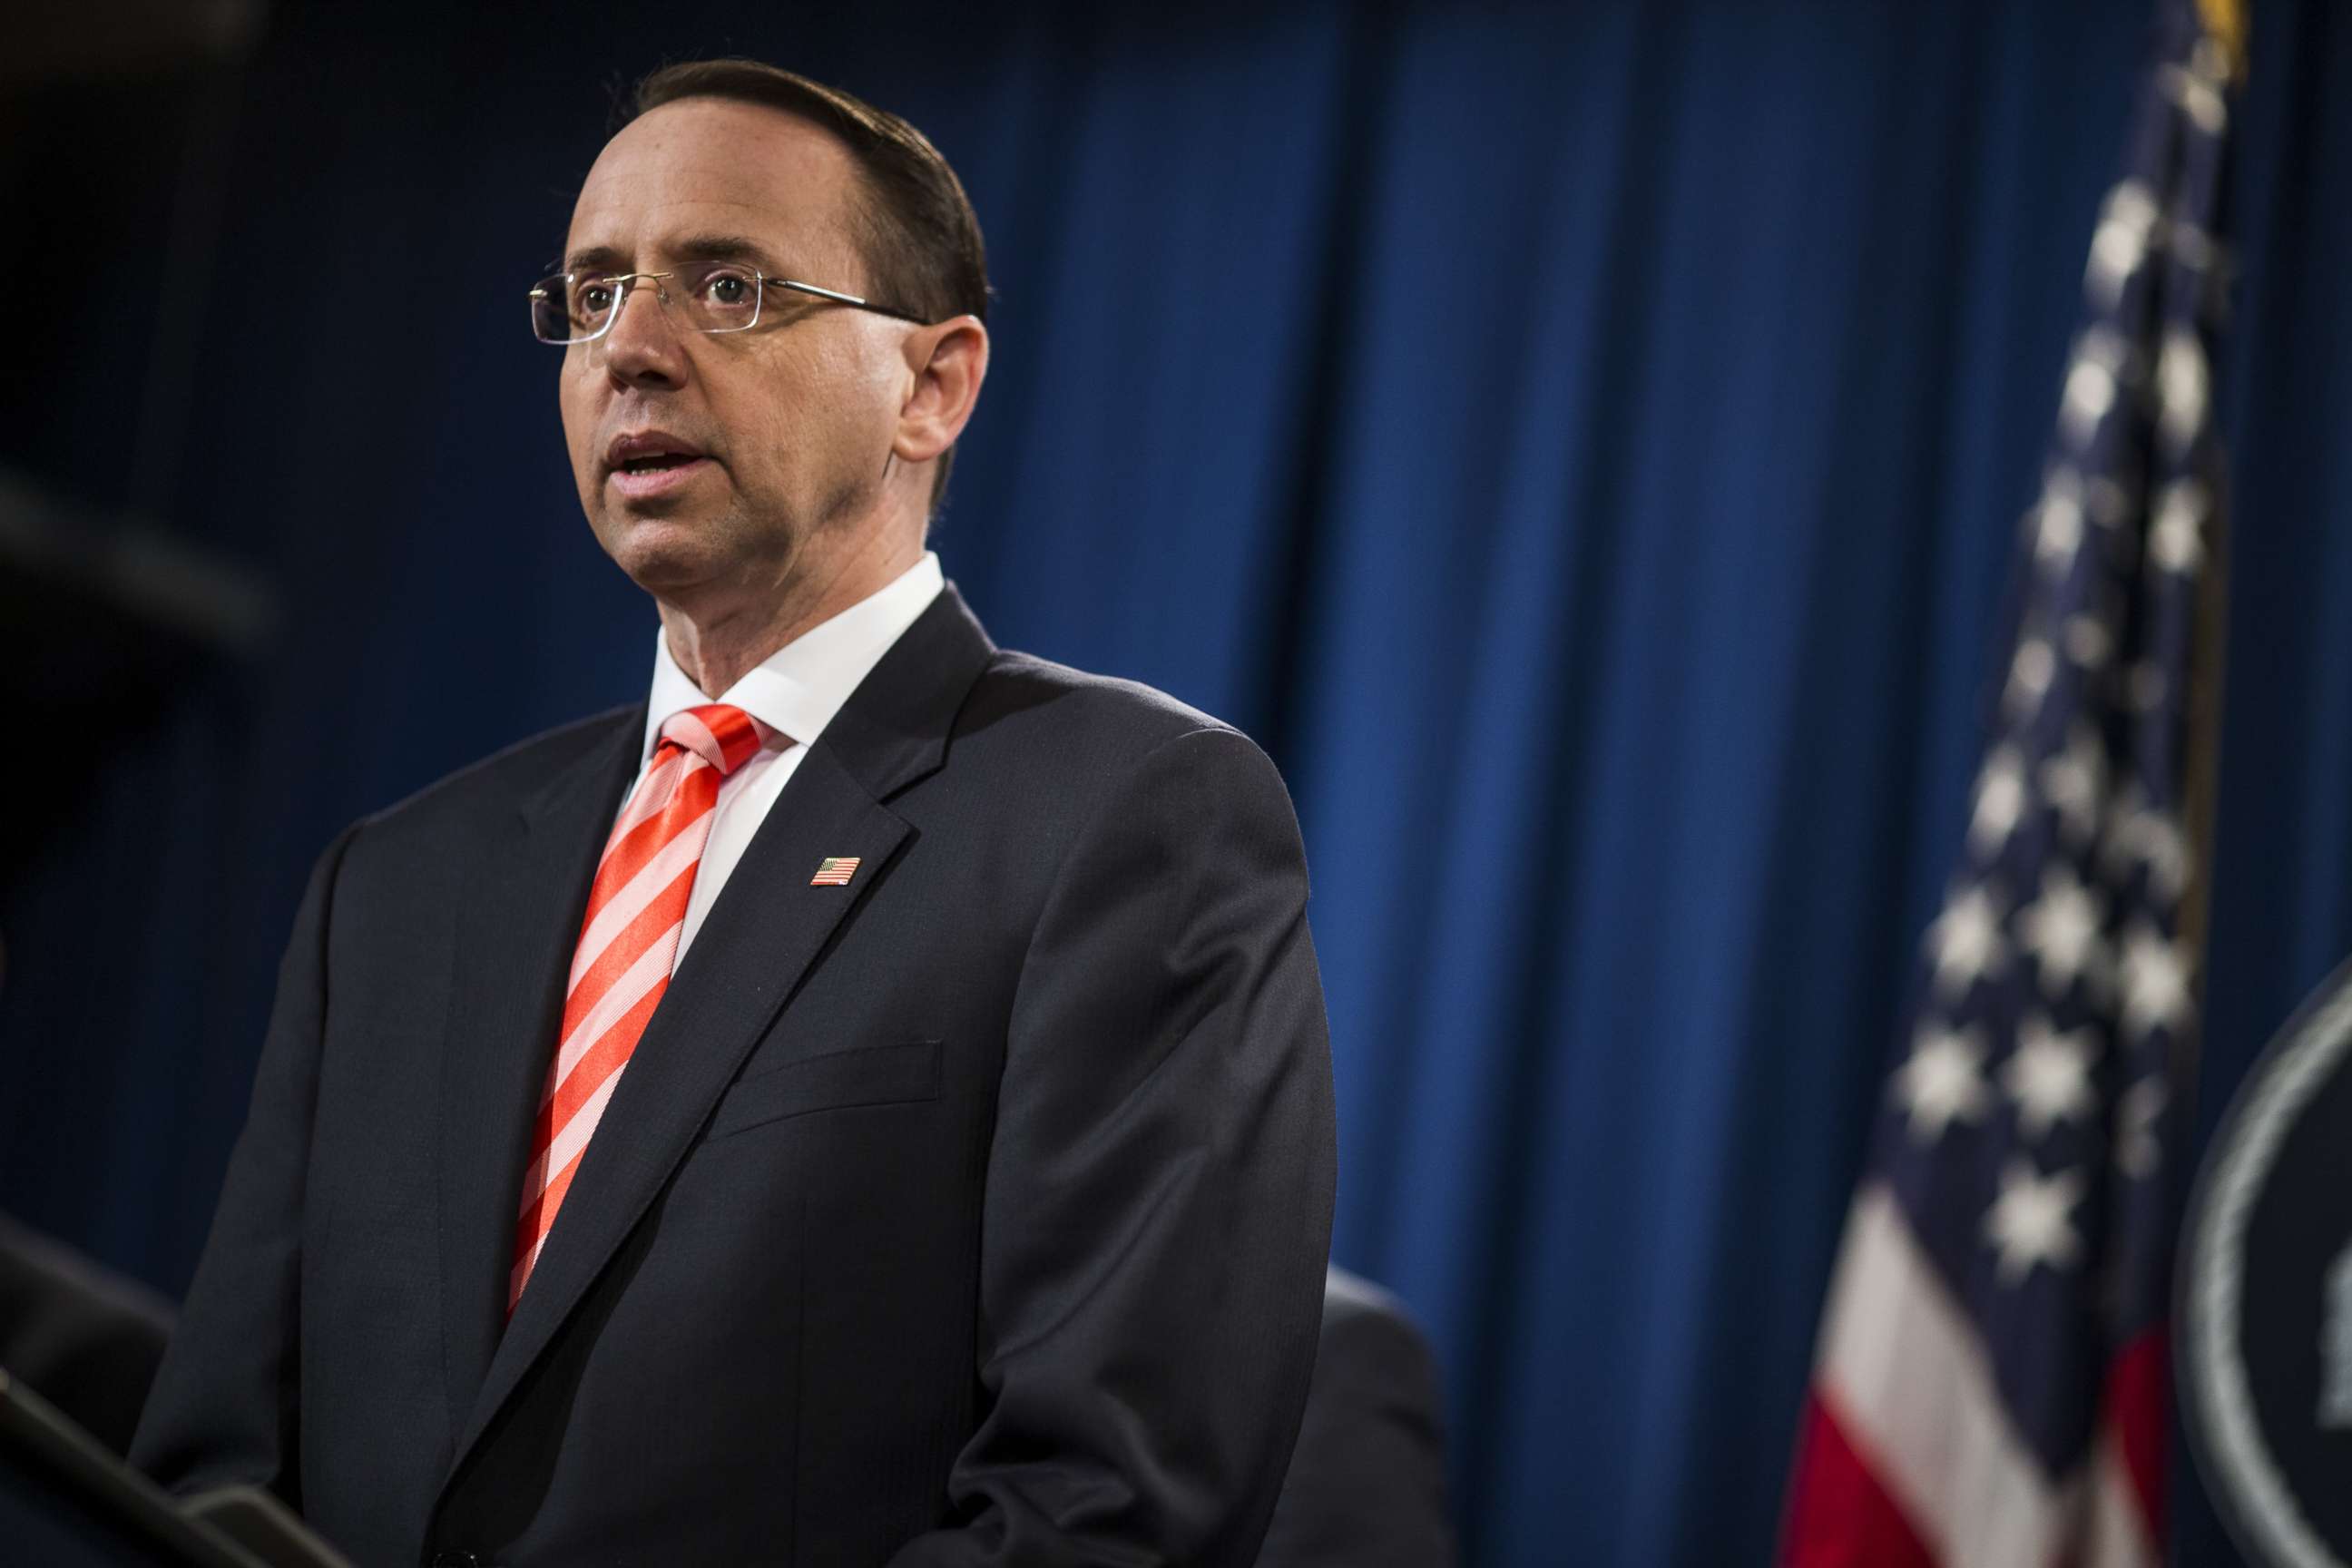 PHOTO: Rod Rosenstein, deputy attorney general, speaks during a news conference at the Department of Justice in Washington, March 23, 2018.